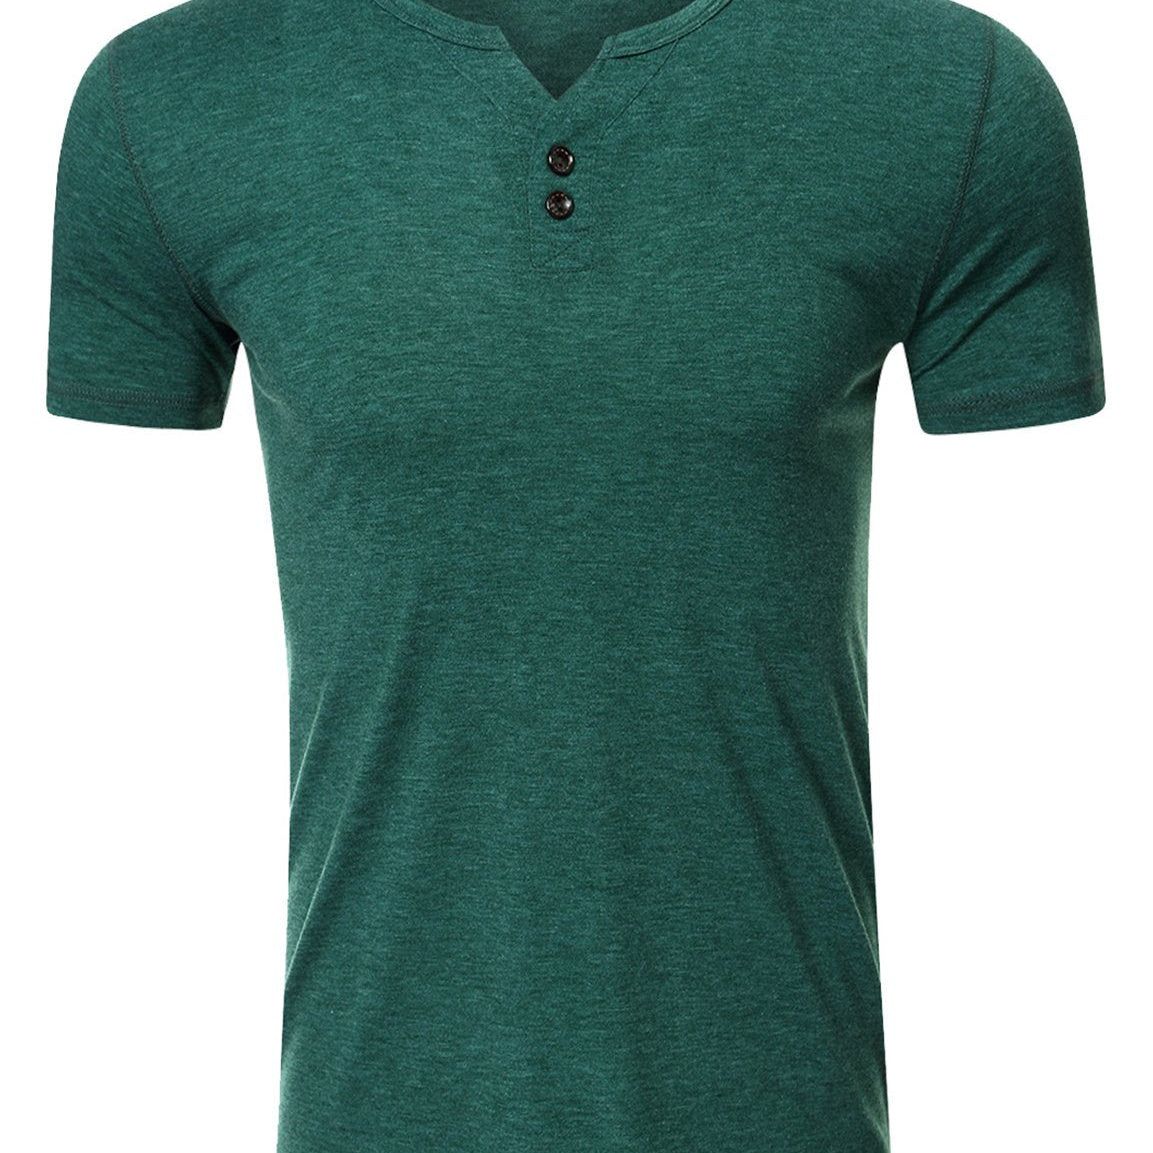 Men's Casual Solid Color Short Sleeve Henley T-shirt